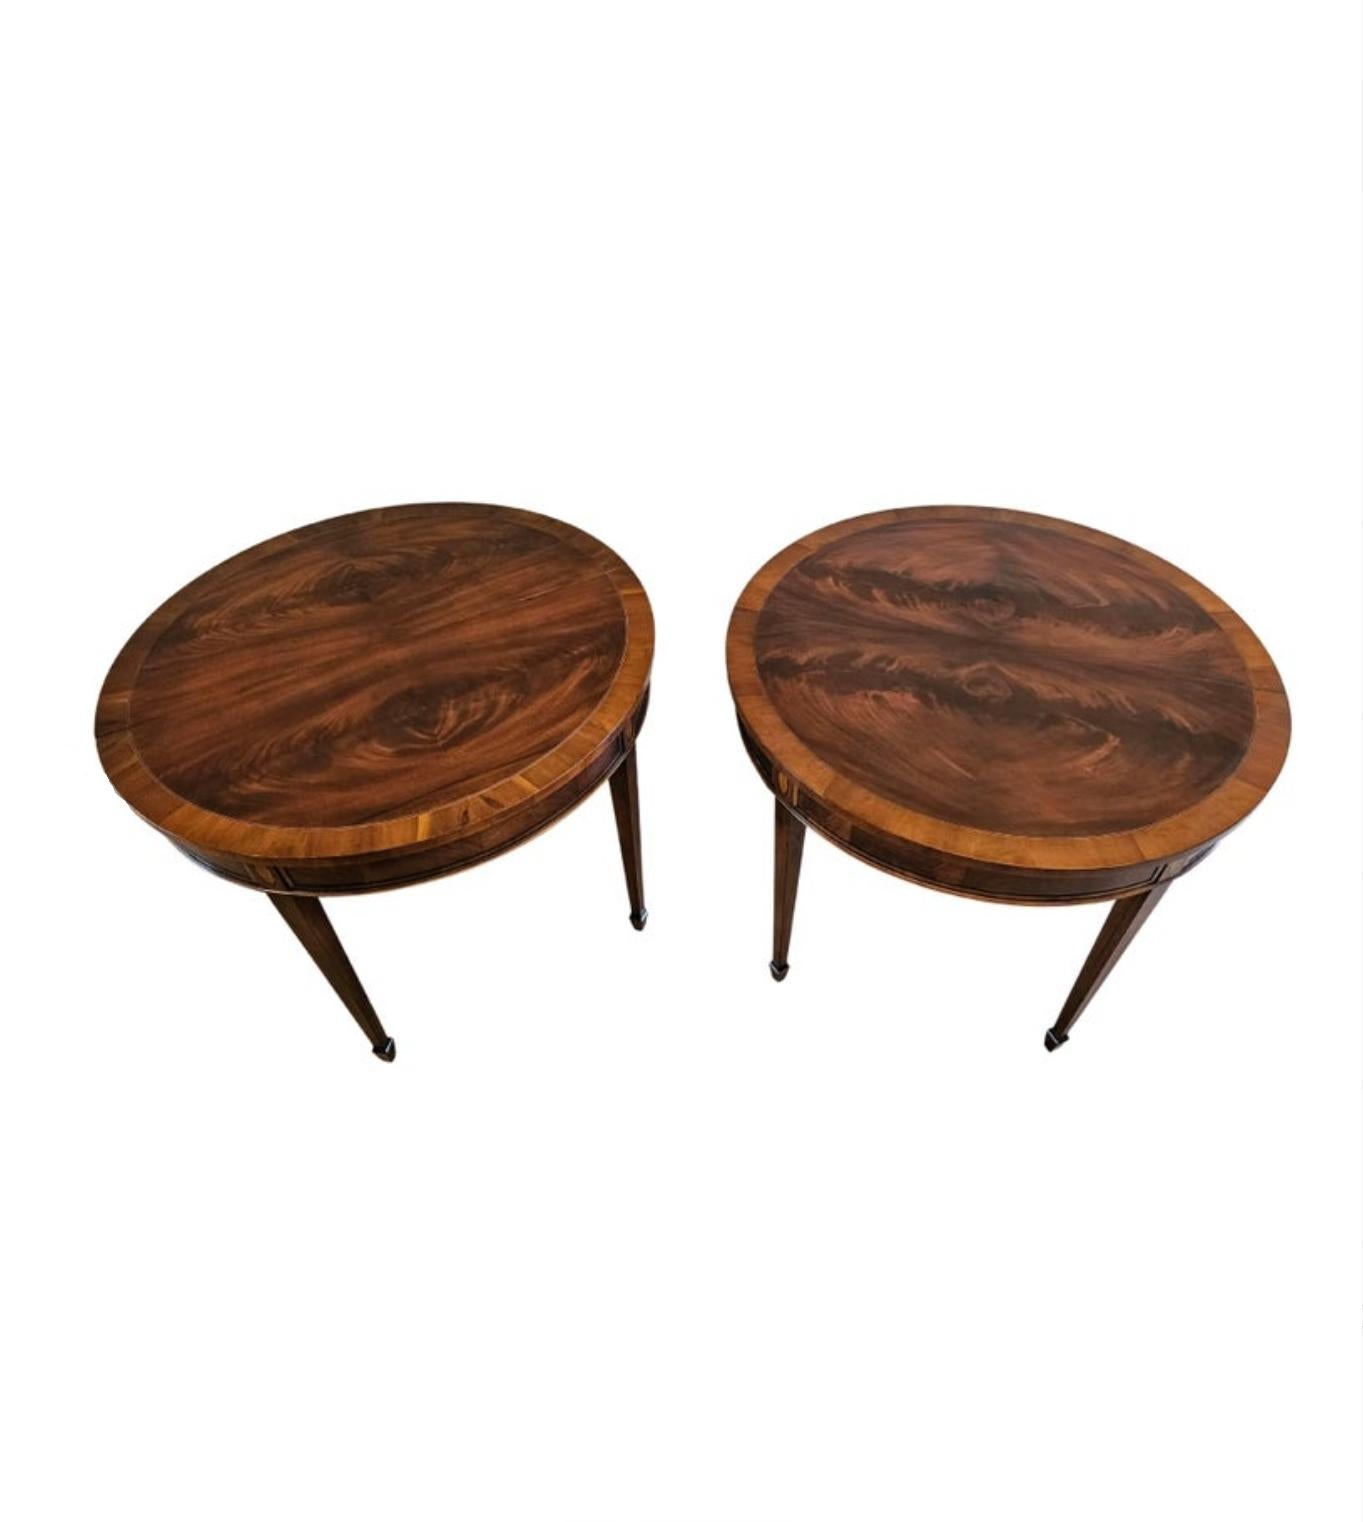 A fine pair of vintage richly figured flame mahogany demilune consoles / round games tables by high-quality American furniture maker Hekman Furniture, since 1922, Grand Rapids, Michigan, United States. 

Exquisitely hand-crafted, dating to the